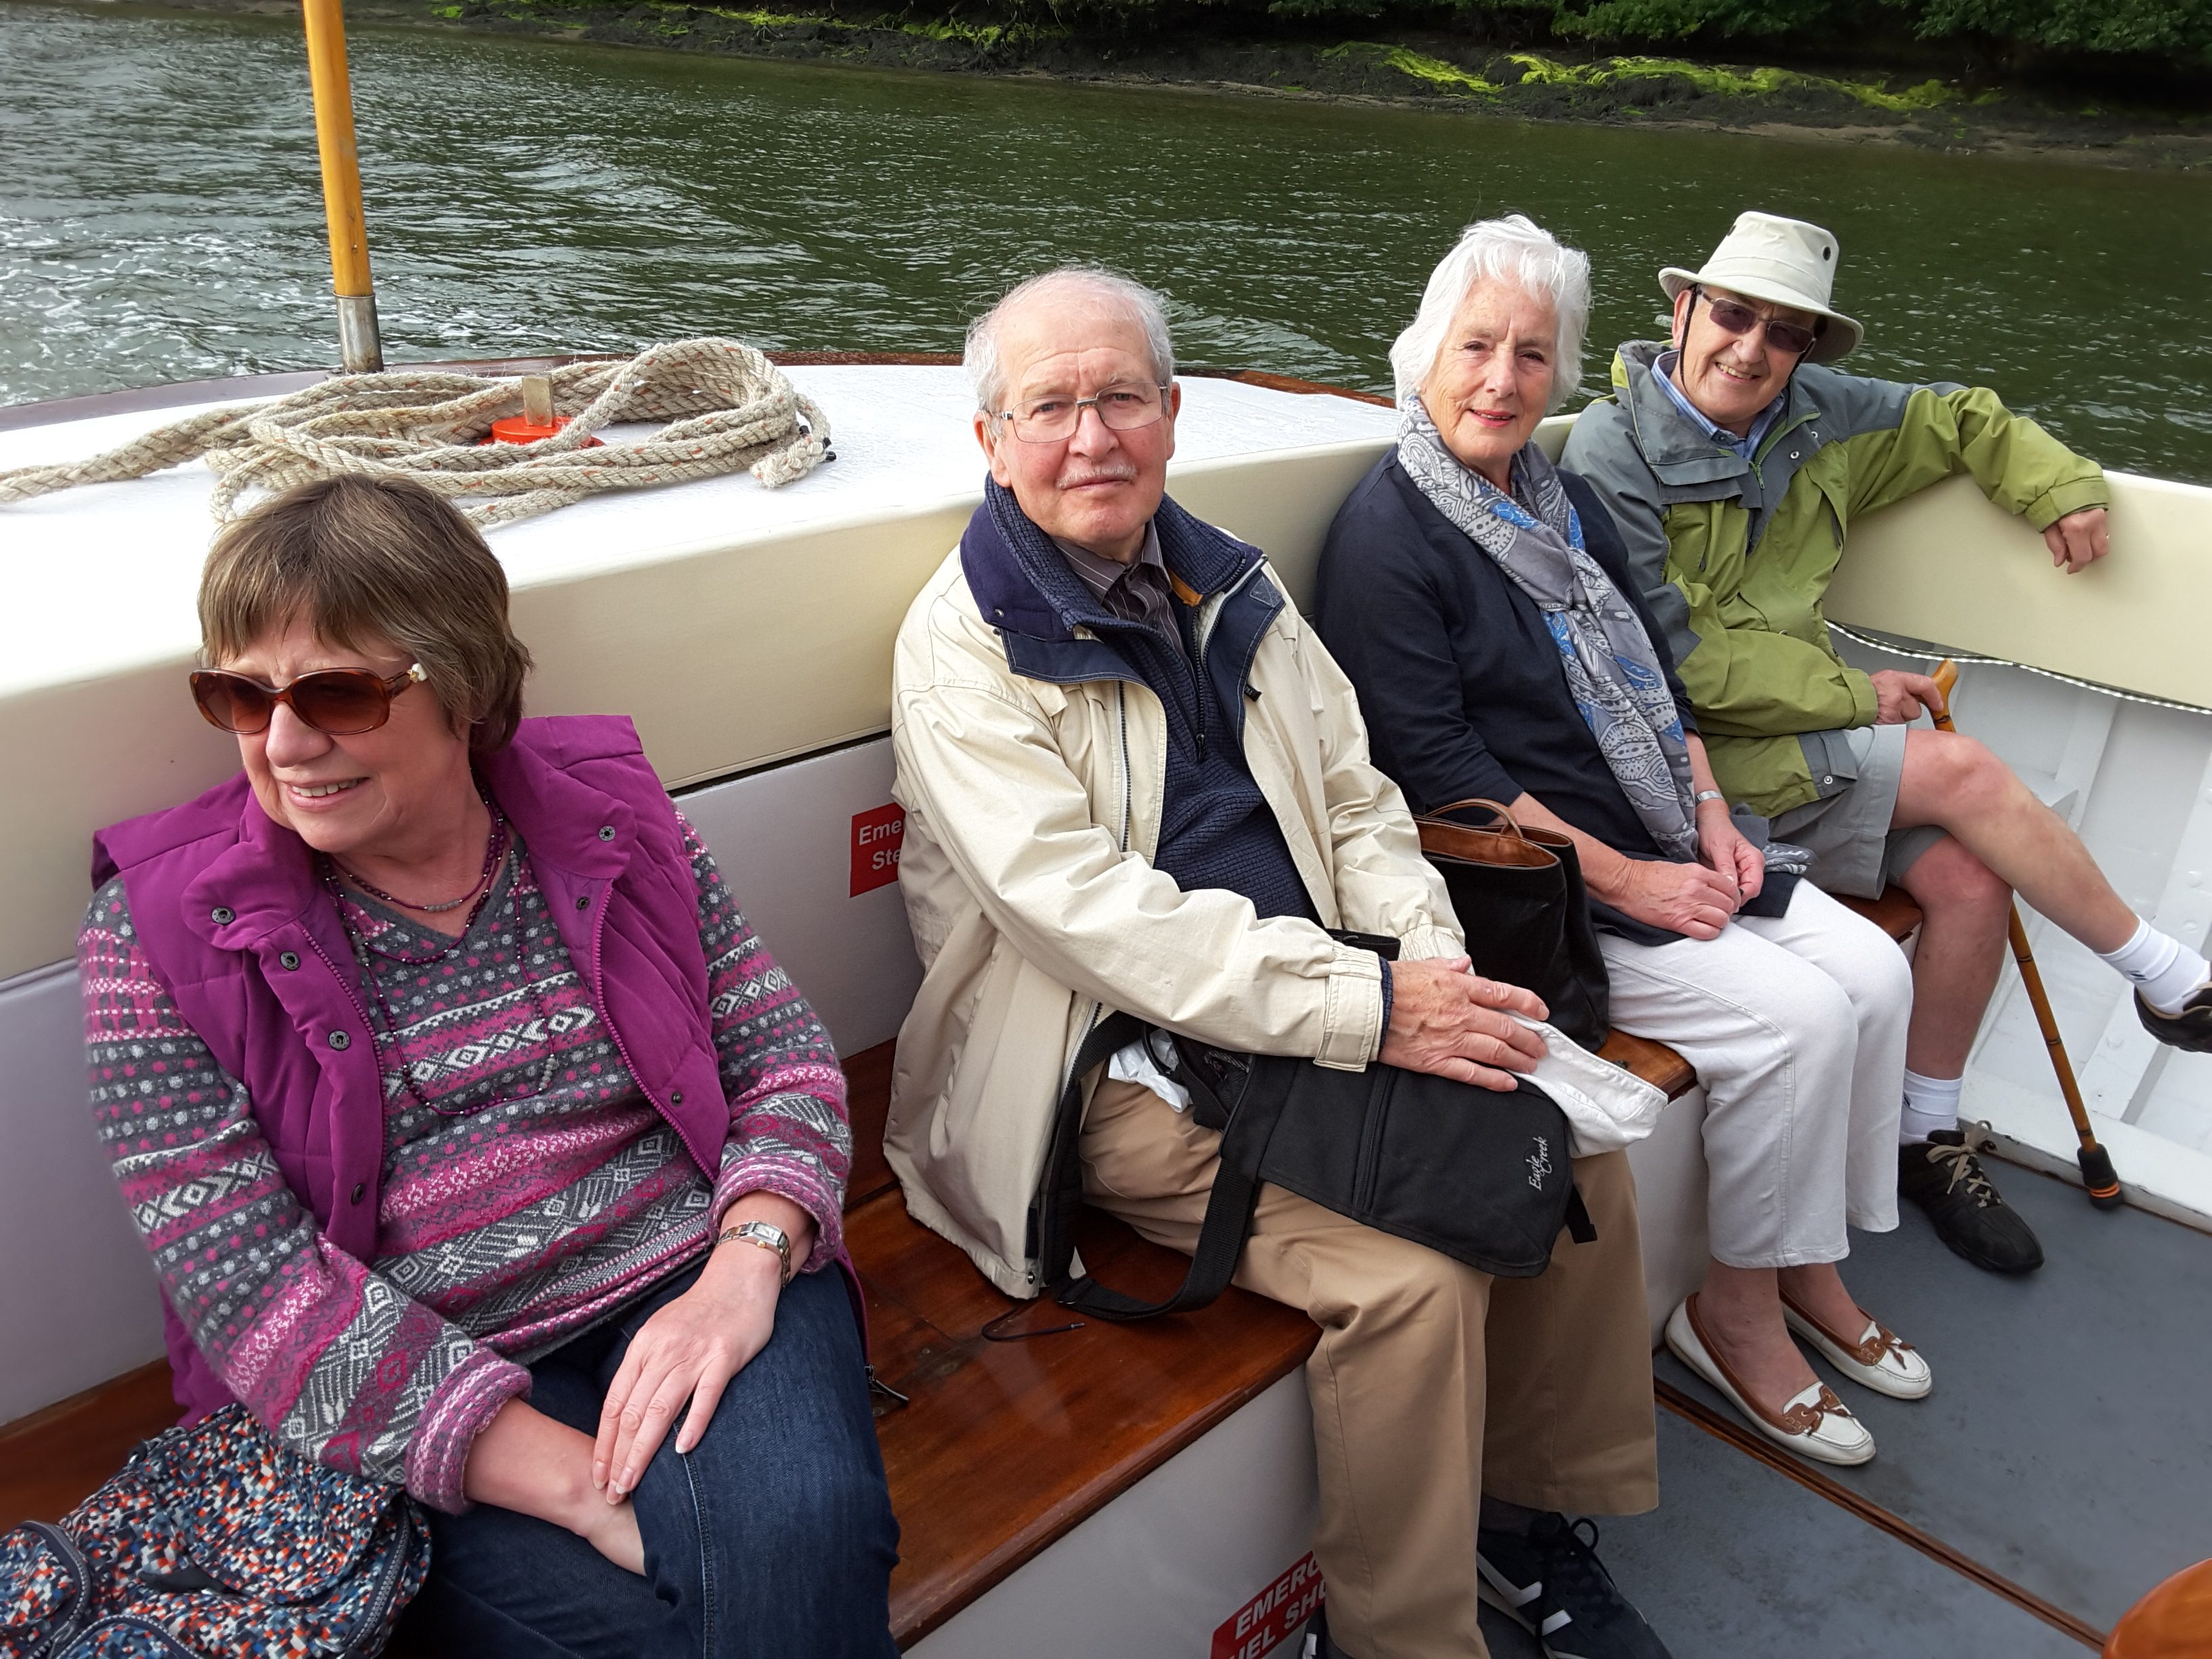 Friends enjoying a calm journey on the River Fal.